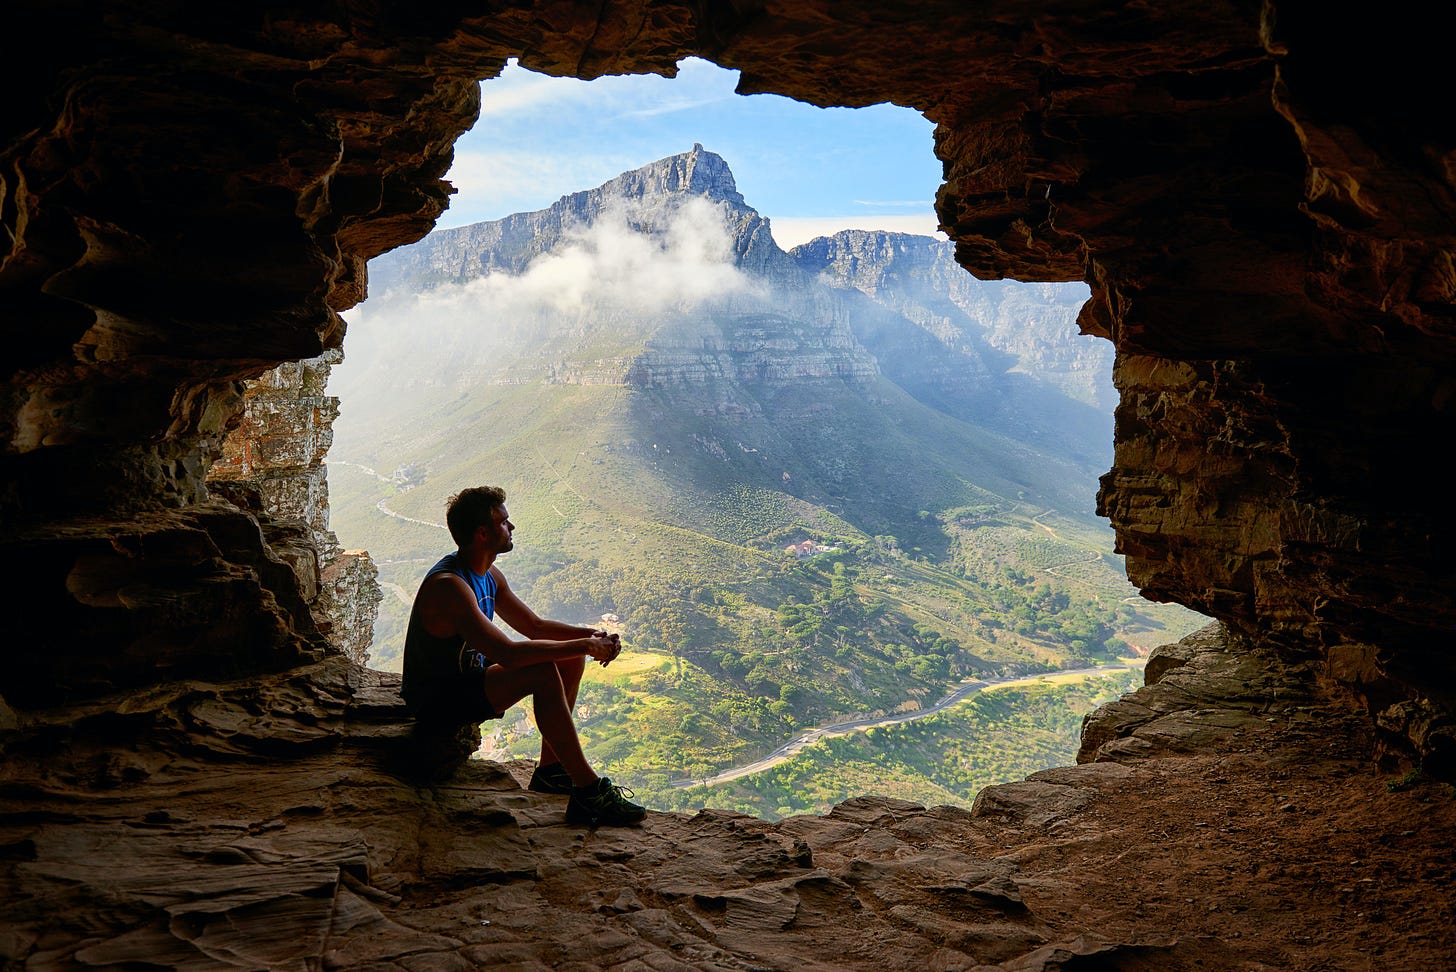 A man sitting inside a cave overlooking a mountain.